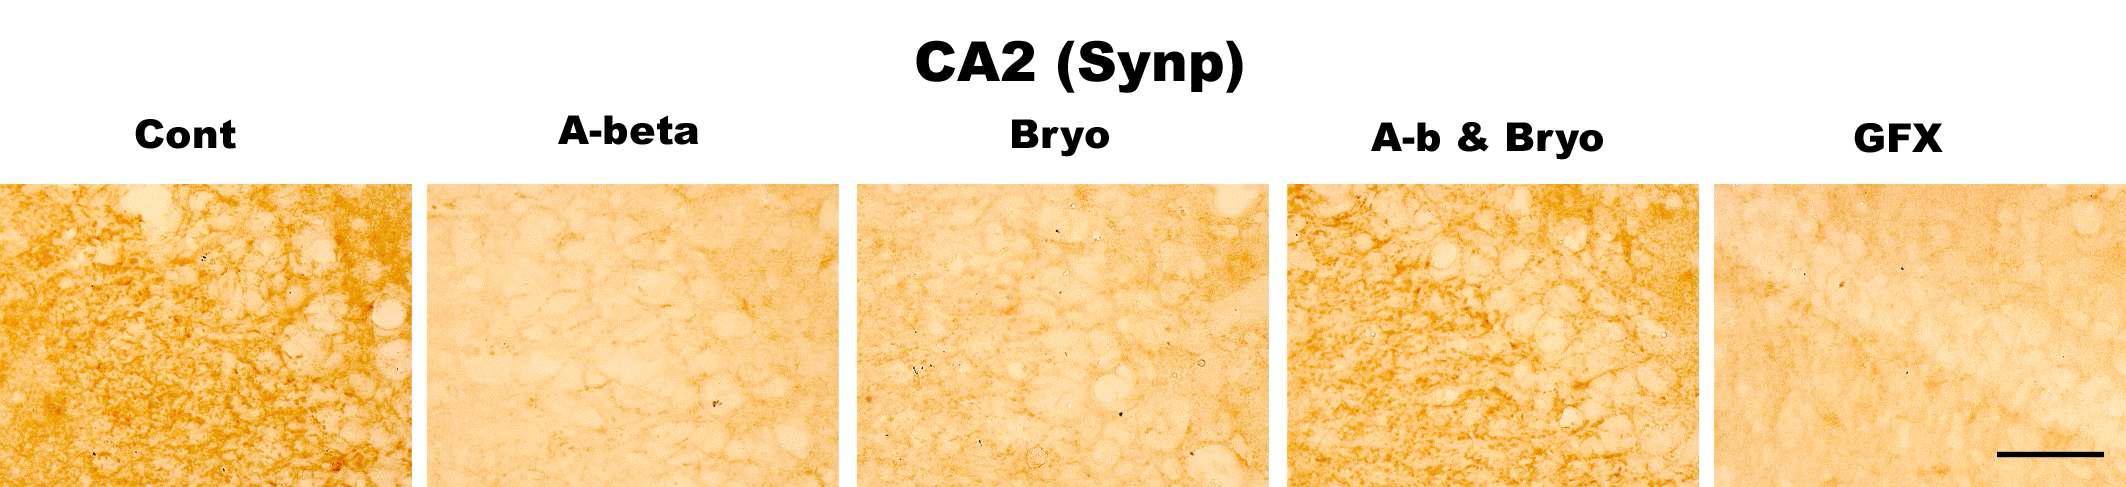 Effects of Bryostatin-1 on synapses in CA2 pyramidal neurons of hippocampus in rat. Bryostatin-1 significantly prevented reduction of synaptophysin (presynaptic protein) in CA2 of rat infused with amyloid beta. PKC inhibitor GFX 109203 reduces synaptophysin in CA2. Intracerebro-ventricular infusion of Aβ and Bryostatin-1 was for four weeks using a micro-osmotic pump. PKC inhibitor GFX 109203 was administrated with I.c.v. injection. Immuno- histochemistry (anti-CD11b) (scale bar, 50μm)(40Χ magnification)